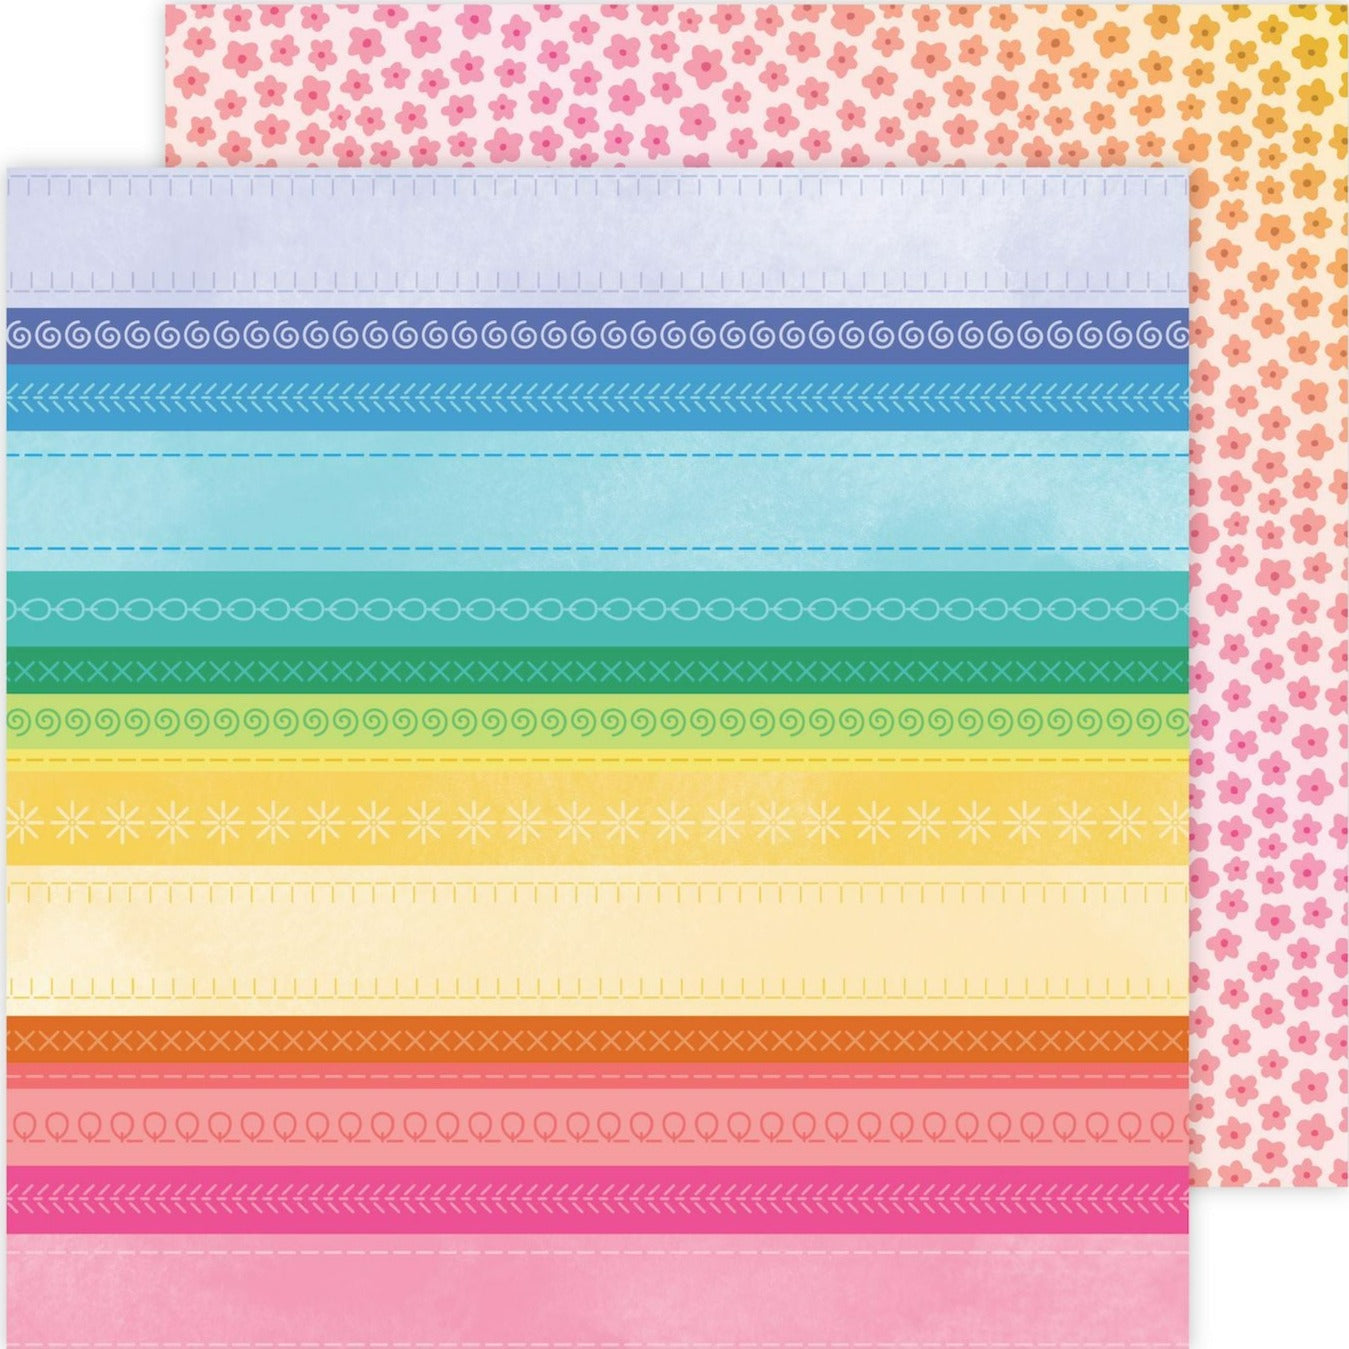 (Side A - stripes in a rainbow of colors with patterns in each stripe, Side B - small flowers on a pink to yellow ombre background)